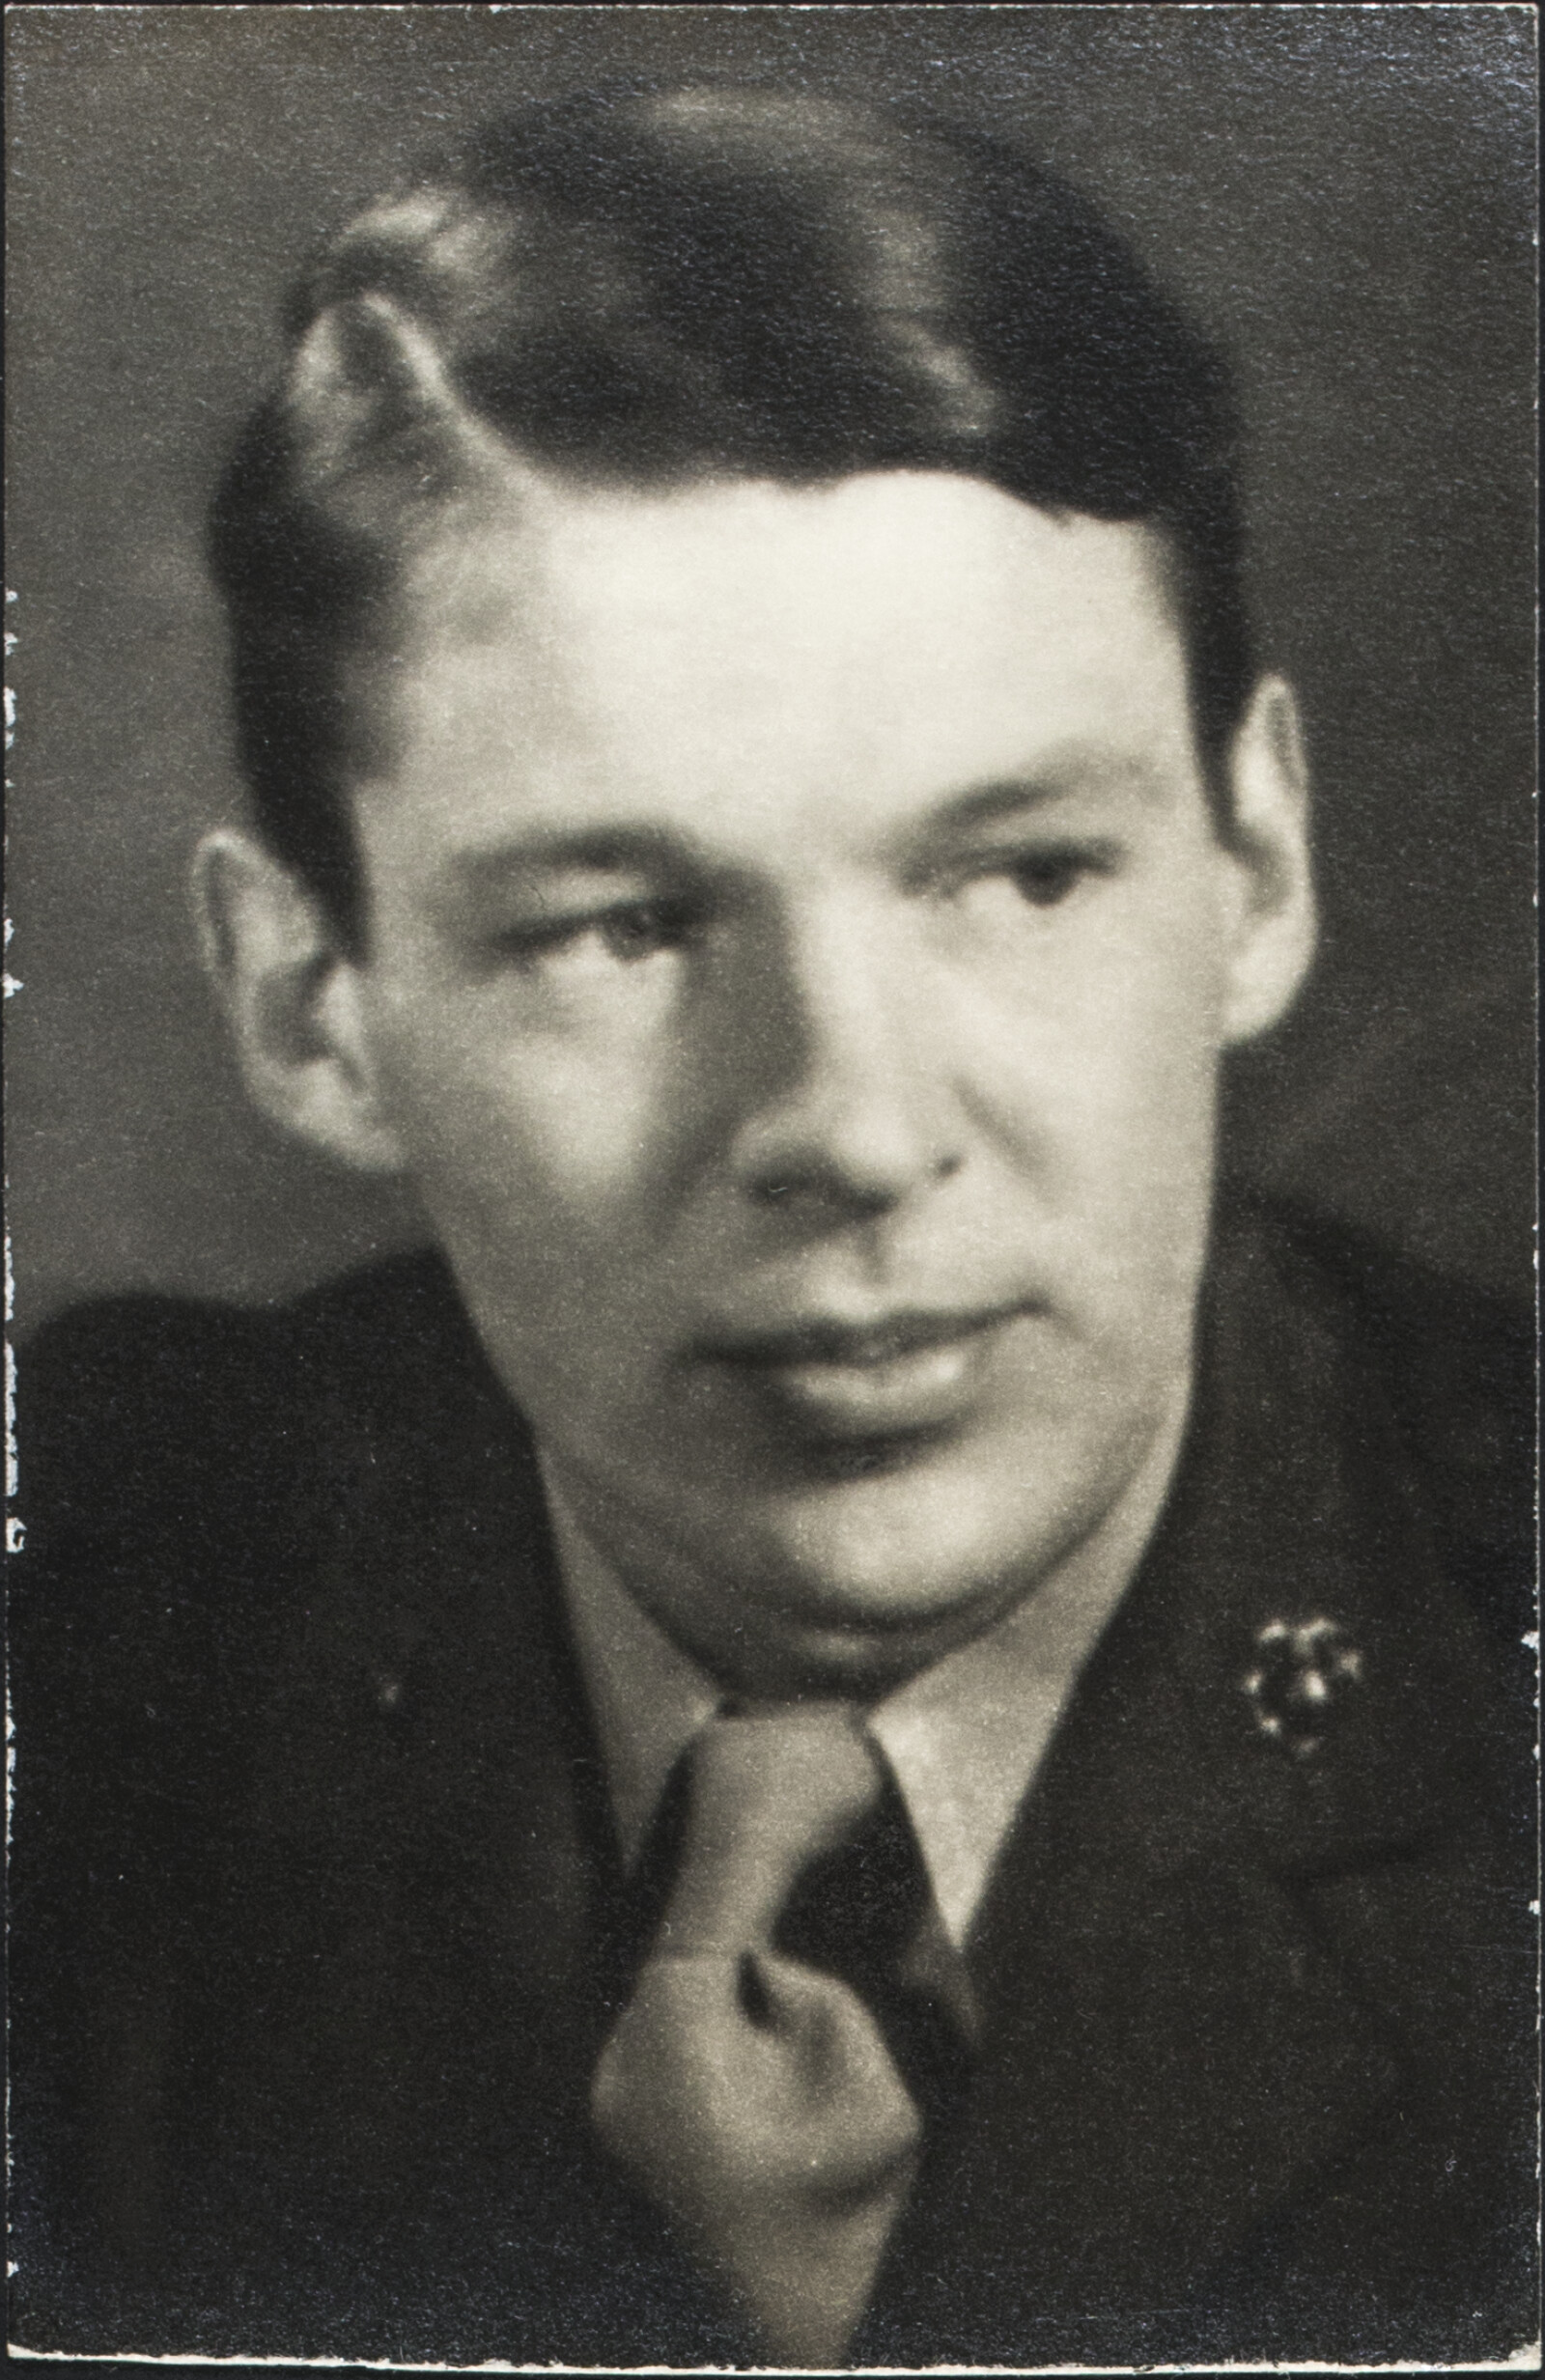 Student and Wartime Photographs